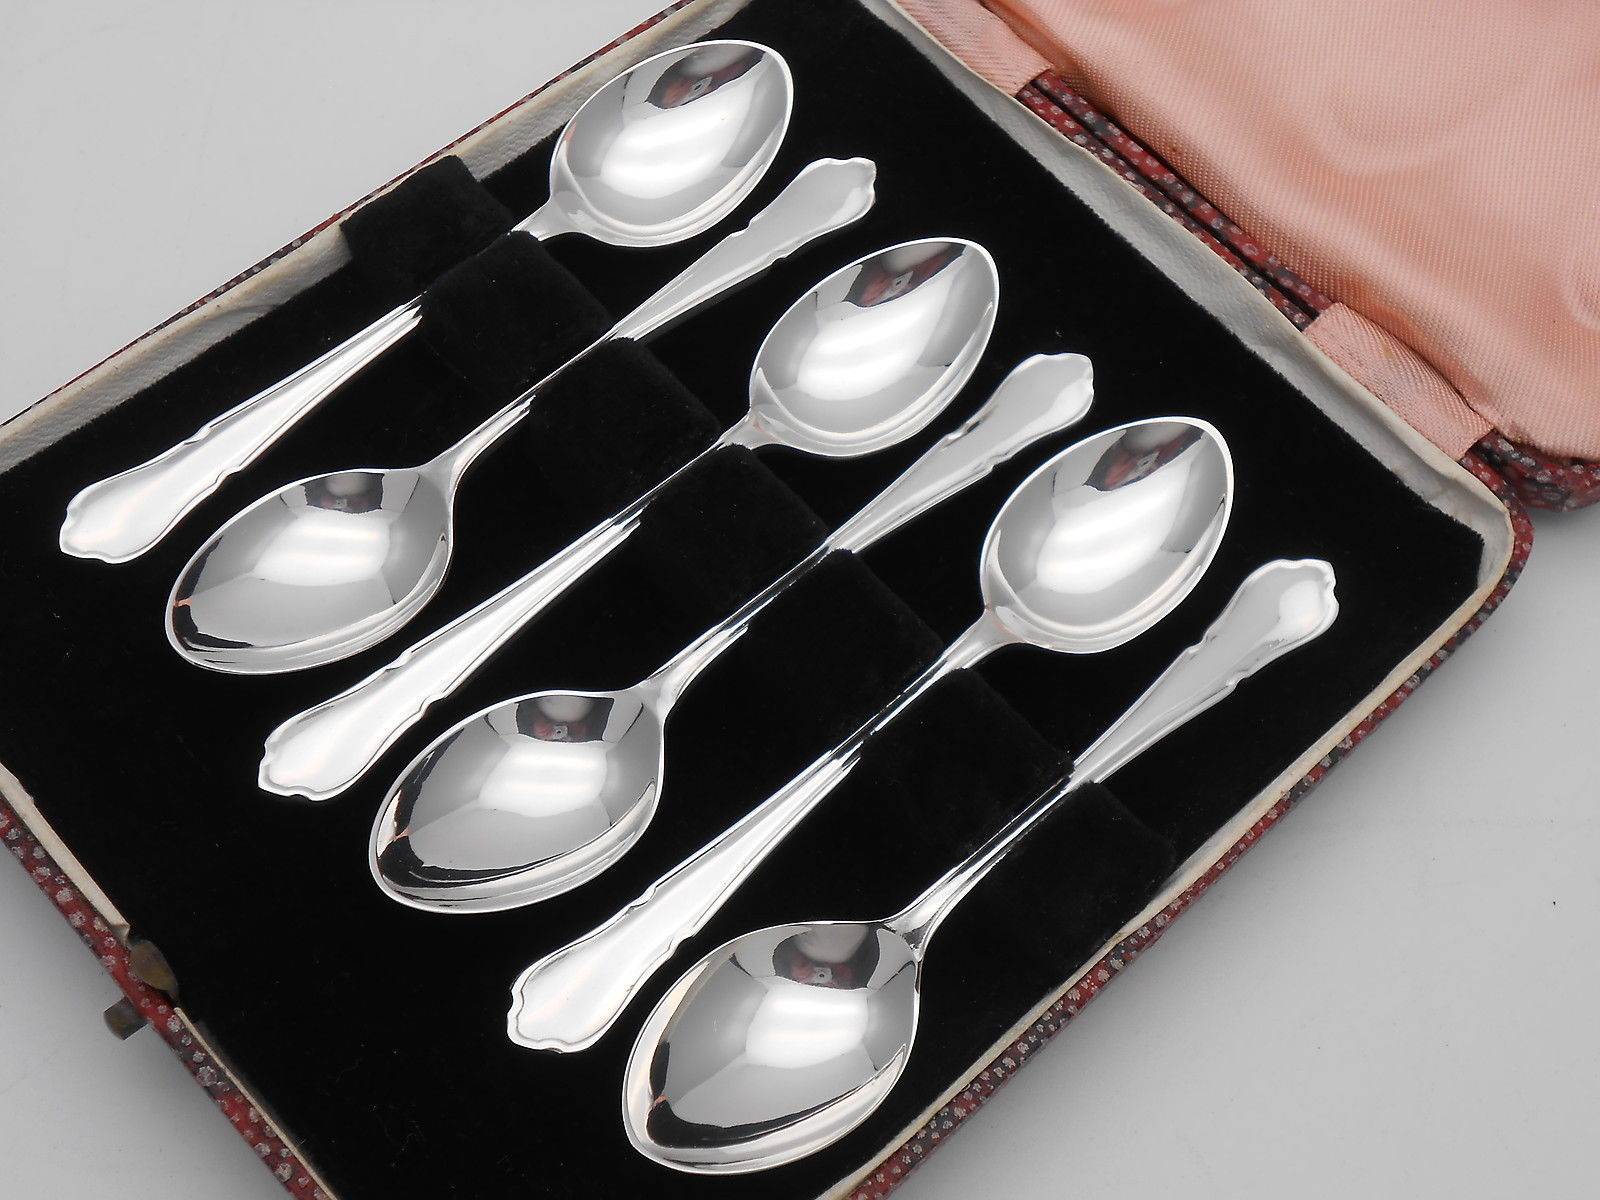 DUBARRY PATTERN - COFFEE SPOONS SET - SILVER PLATED - CASED - VINTAGE